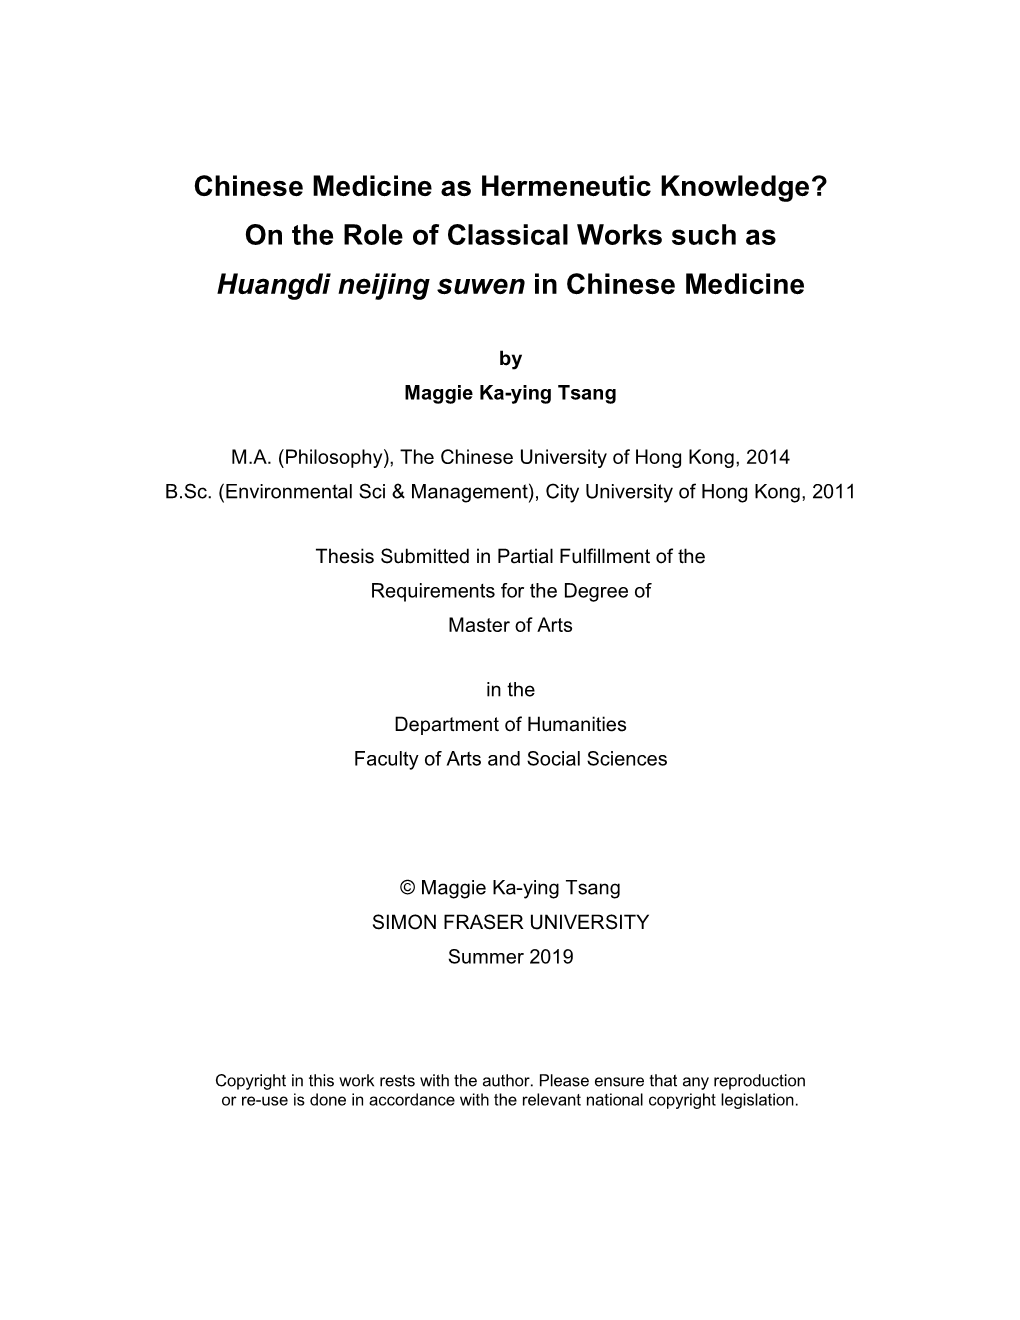 Chinese Medicine As Hermeneutic Knowledge? on the Role of Classical Works Such As Huangdi Neijing Suwen in Chinese Medicine